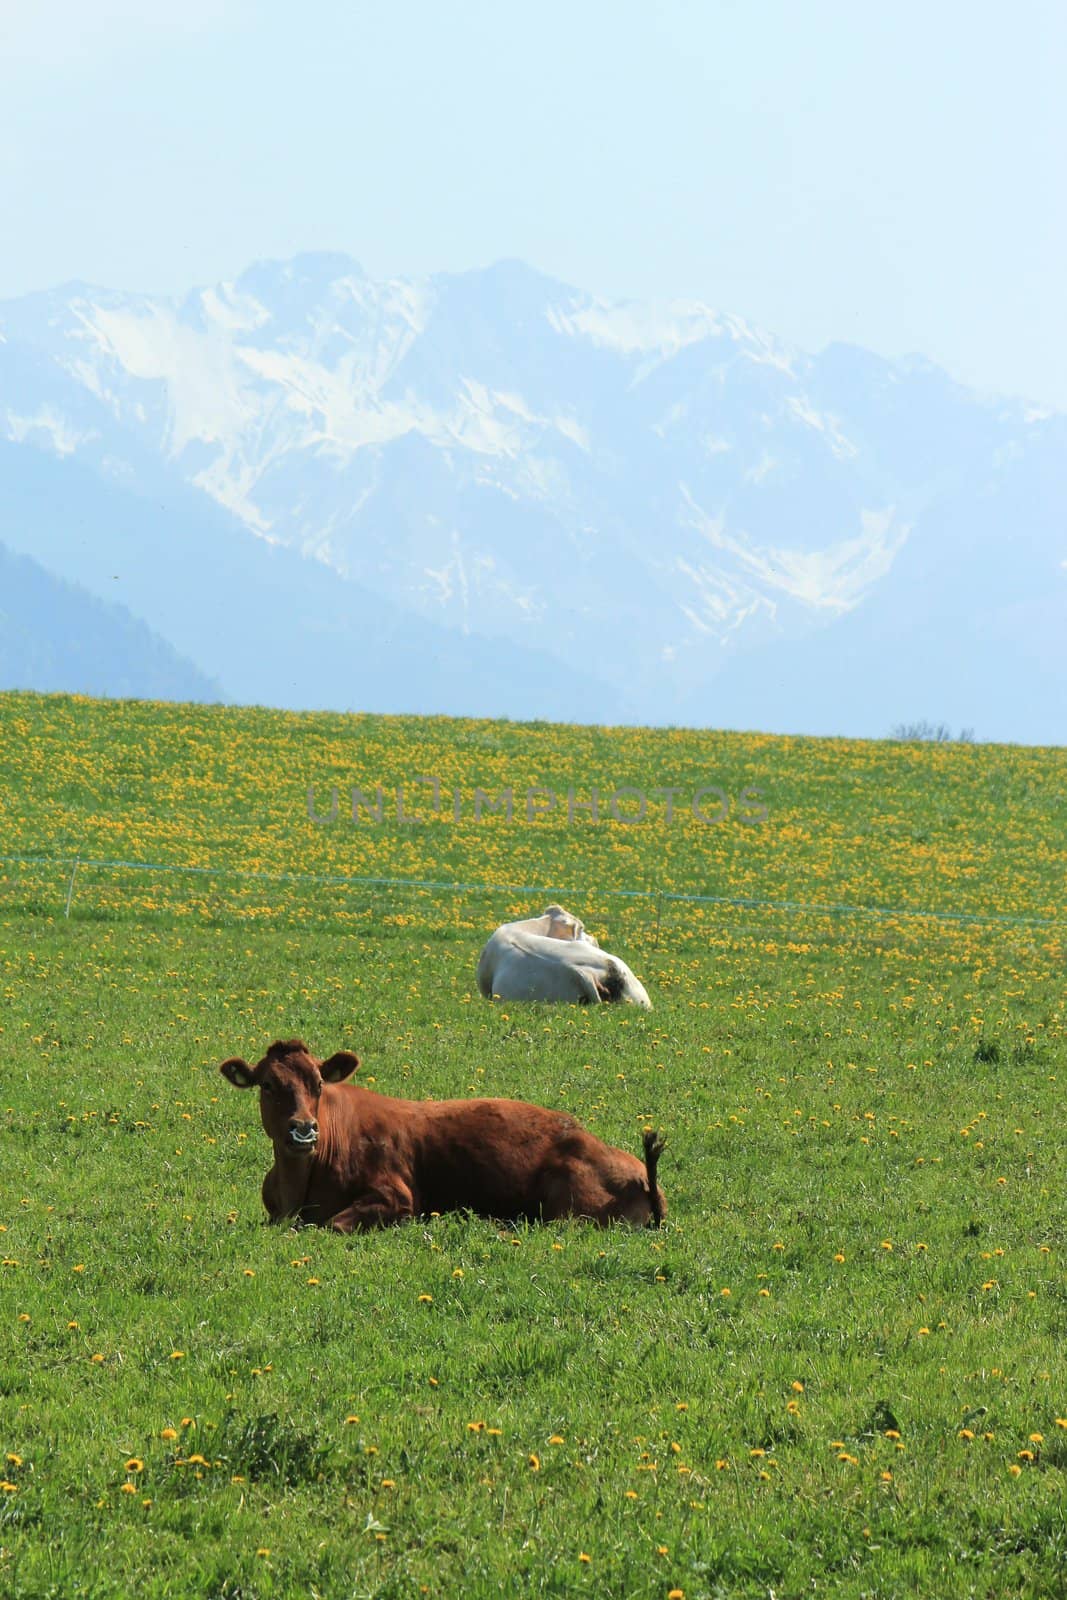 Brown and white cows resting in a meadow in front of the Alps mountains, Switzerland